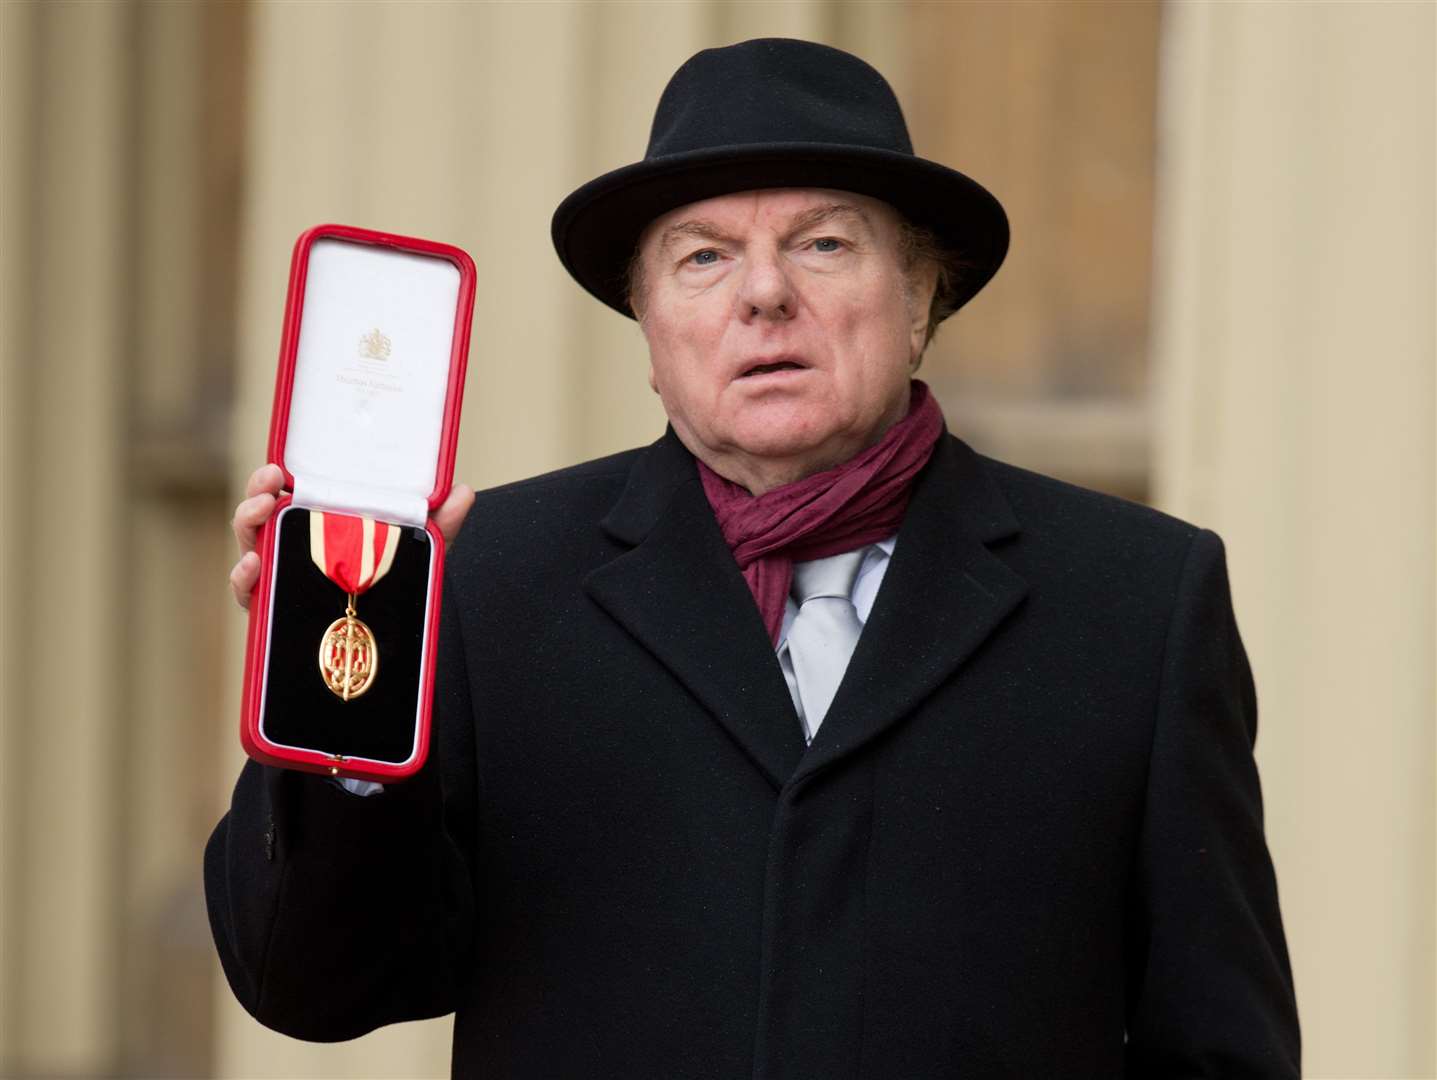 Sir Van Morrison at Buckingham Palace after being knighted by the Prince of Wales (Yui Mok/PA)